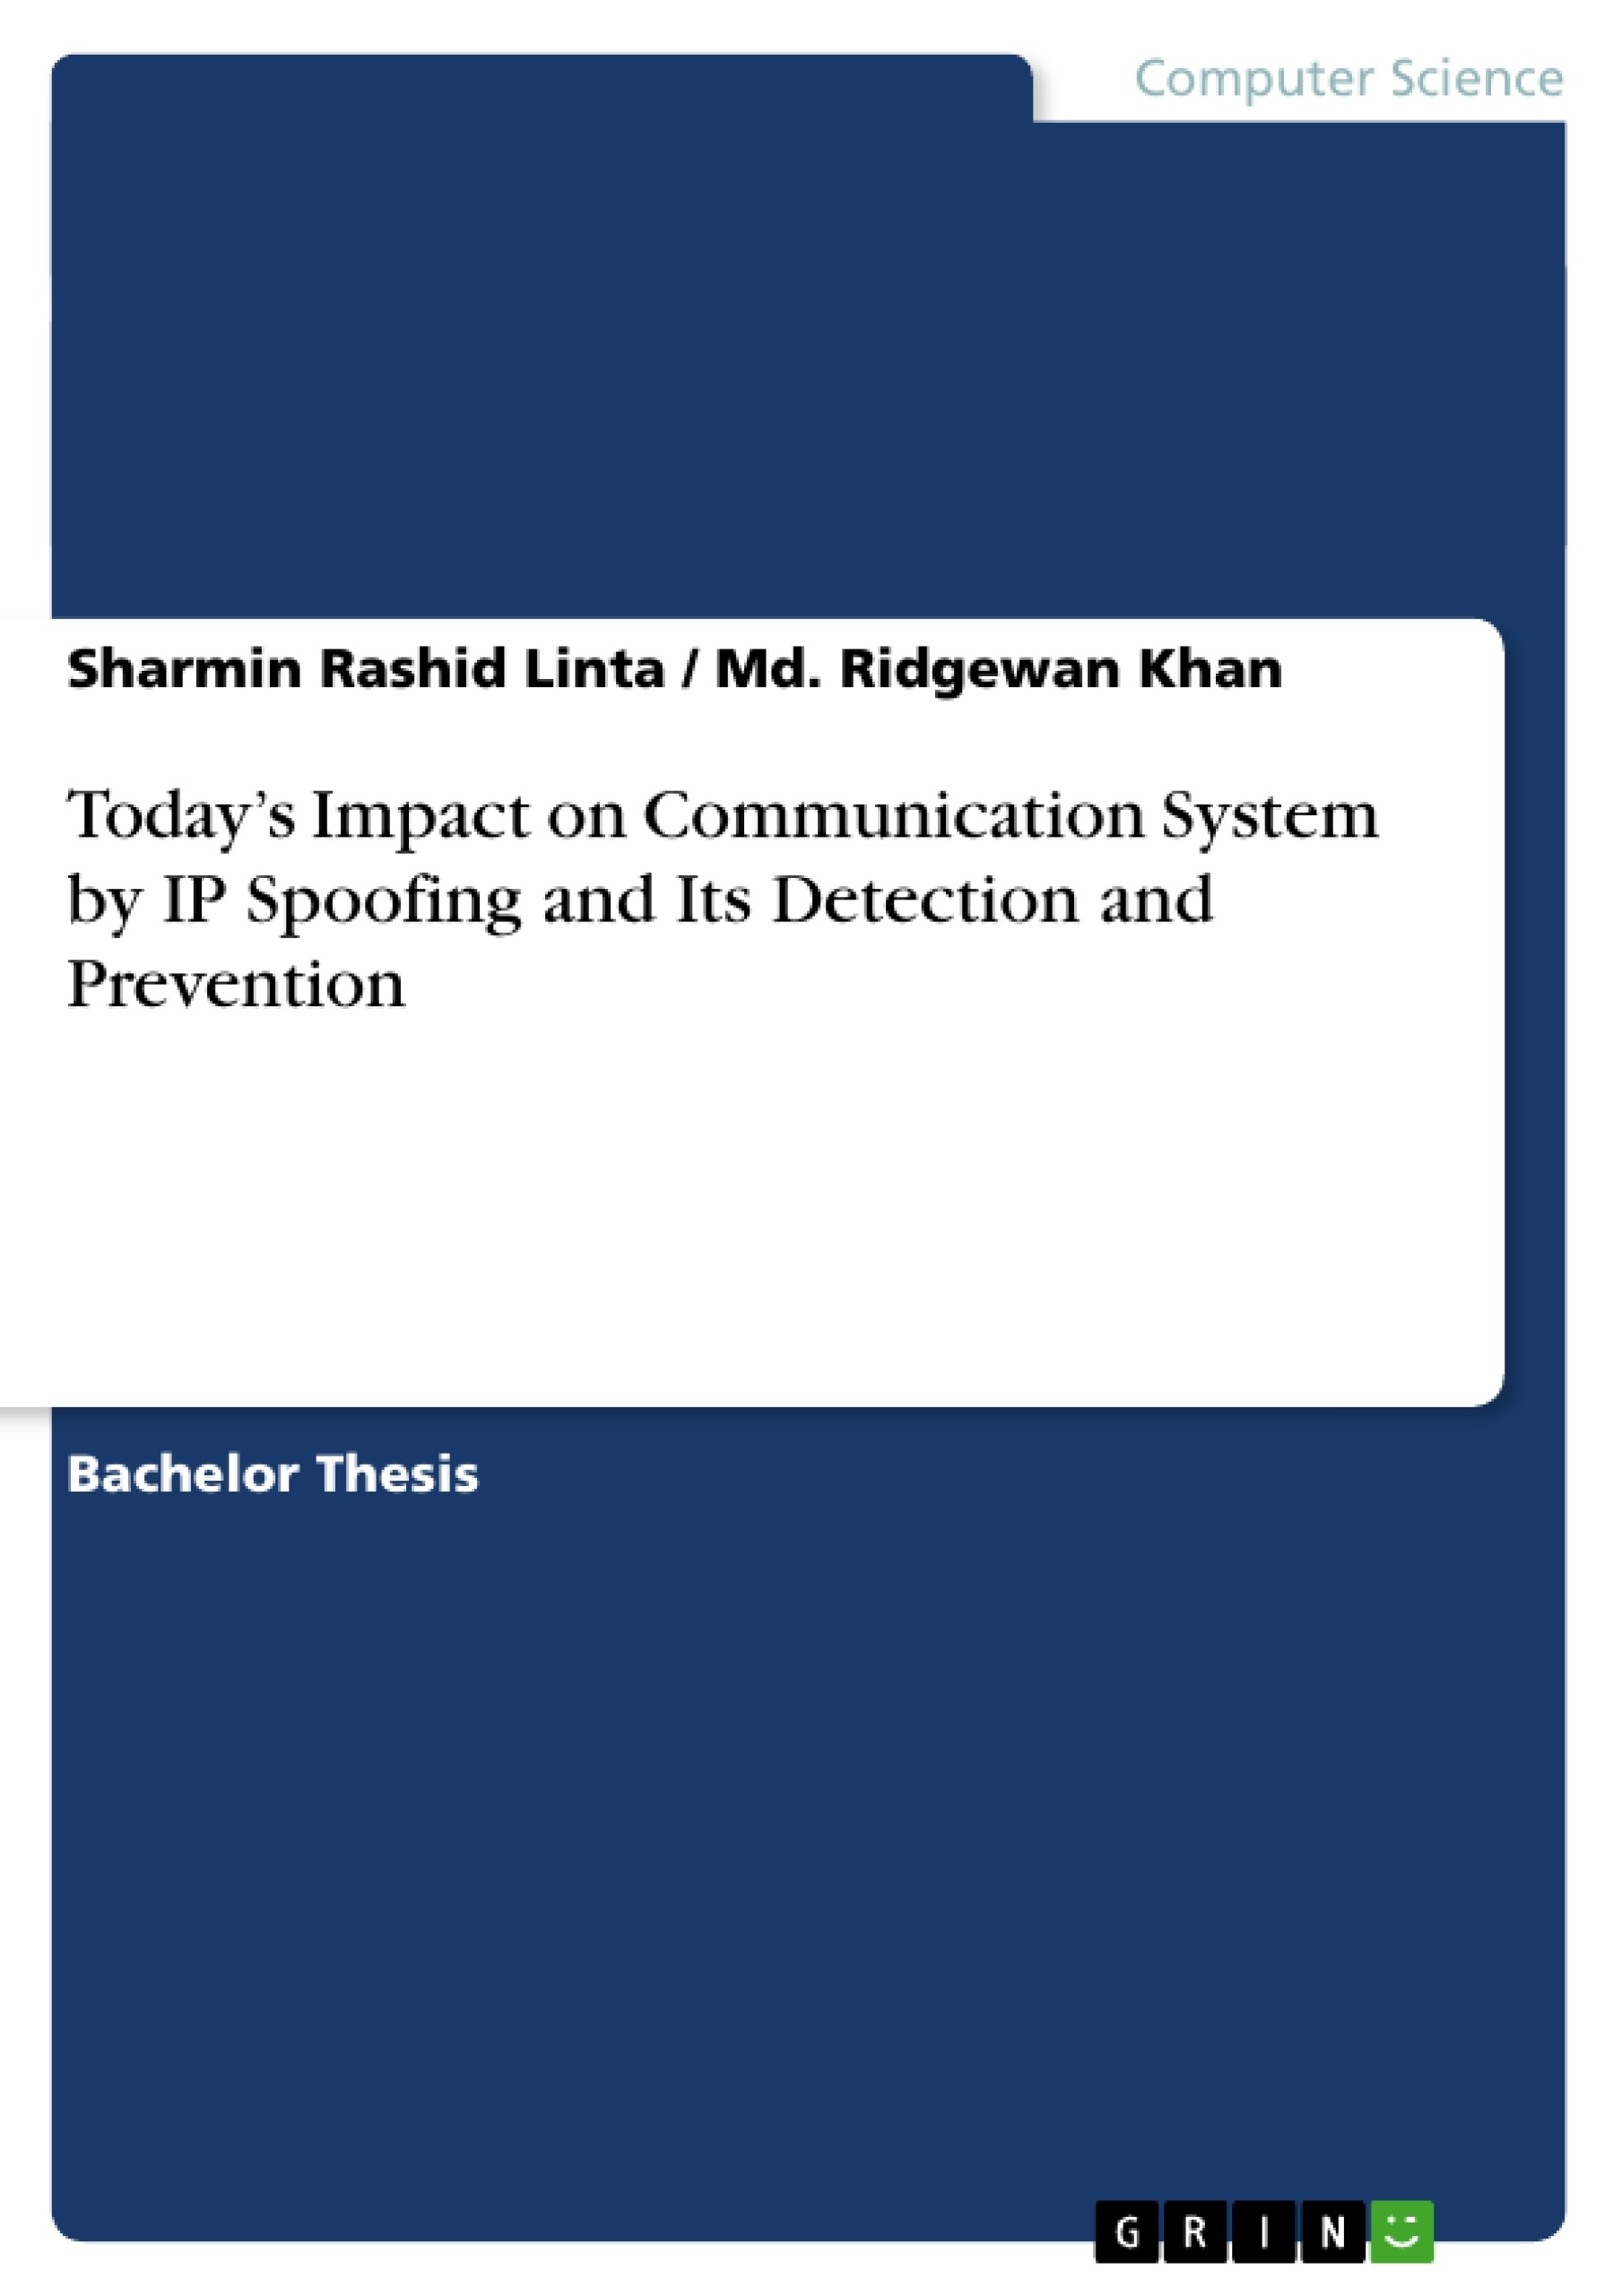 Titre: Today’s Impact on Communication System by IP Spoofing and Its Detection and Prevention